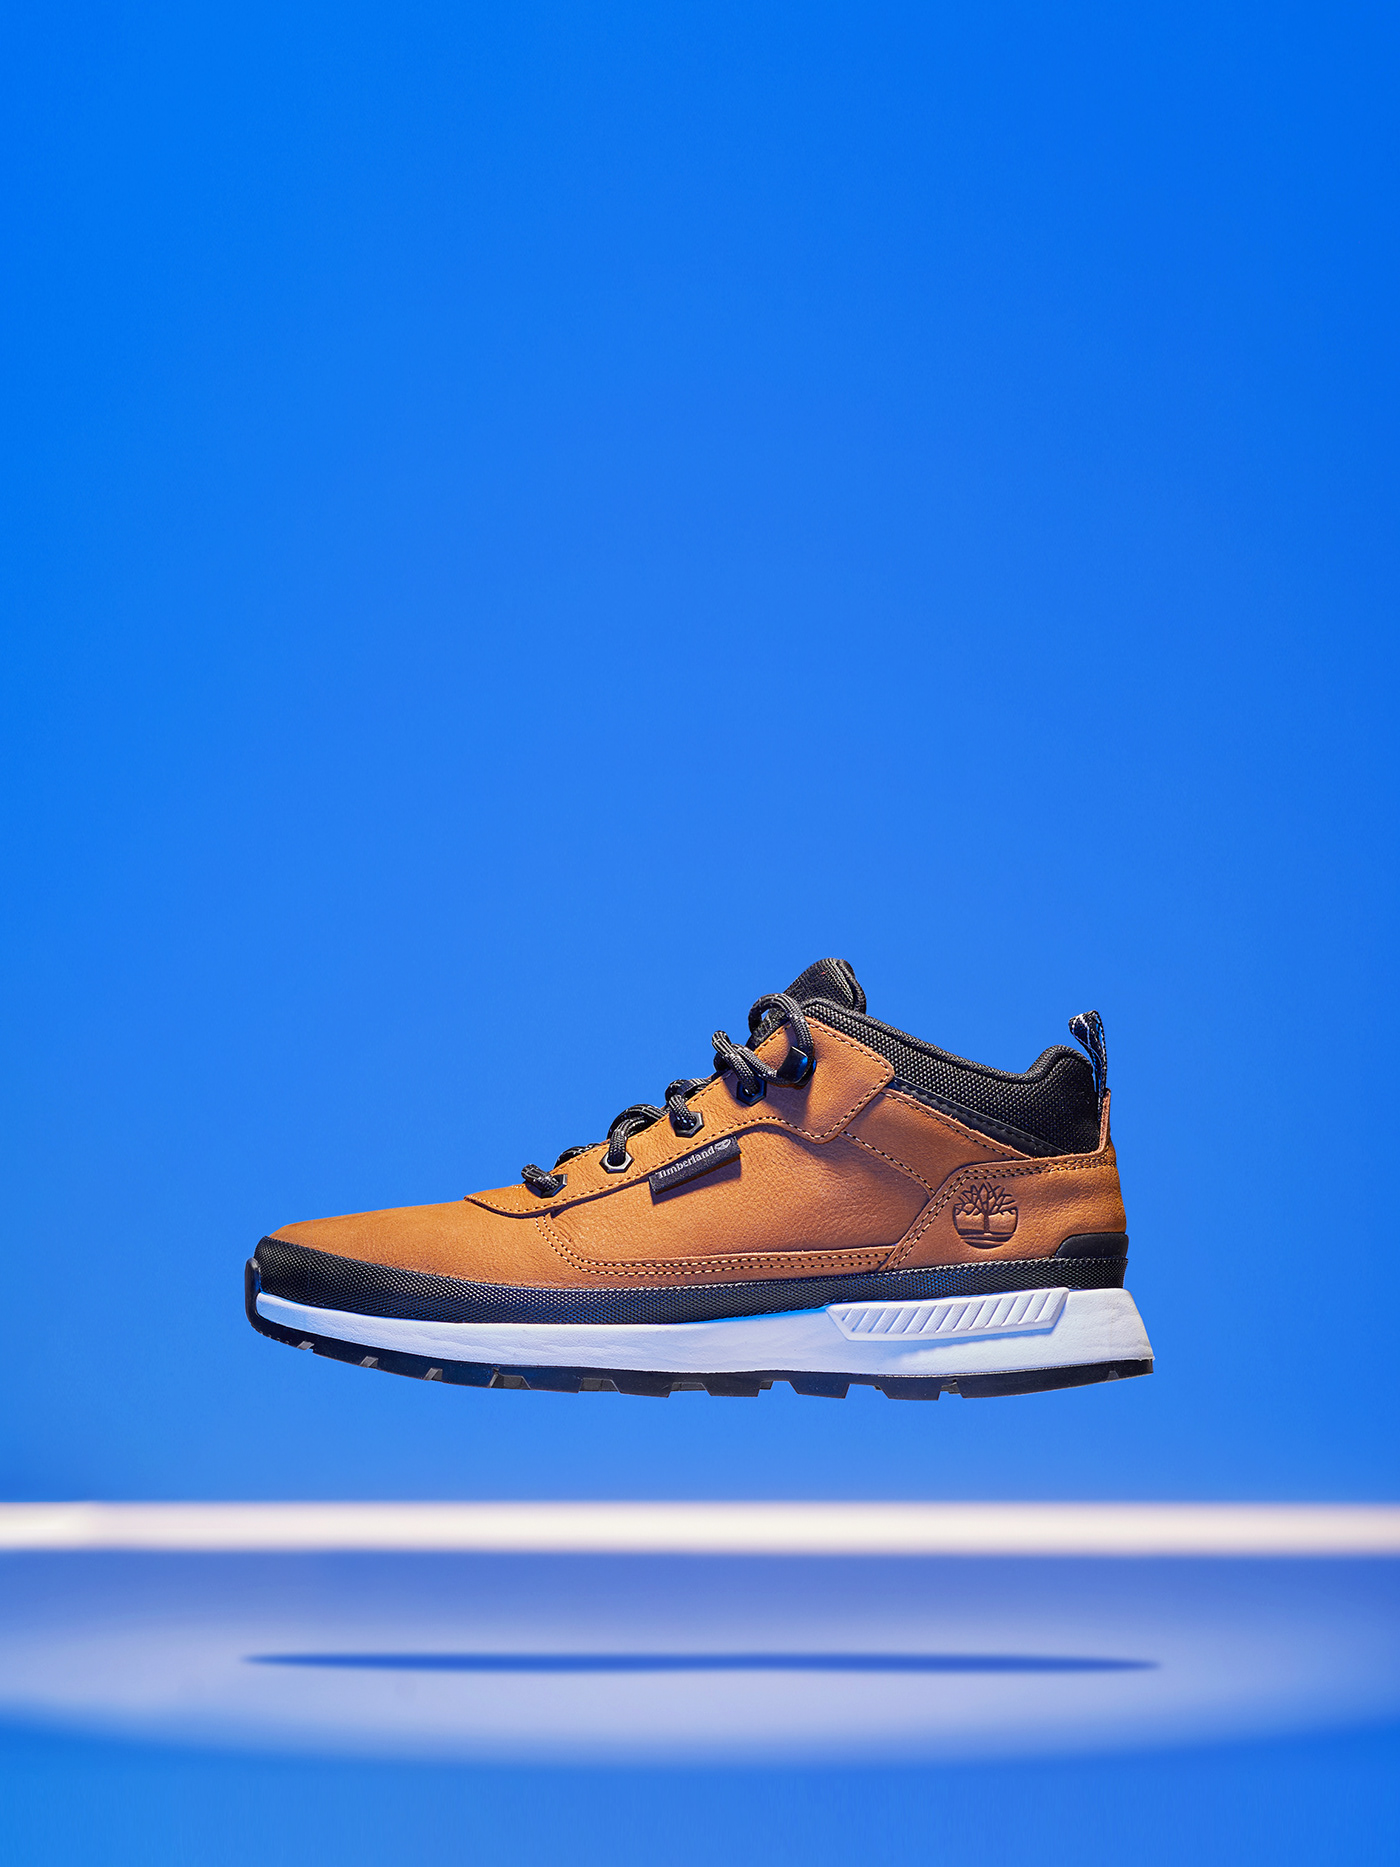 loudspeaker Product Photography retouch shoes sneakers tennis